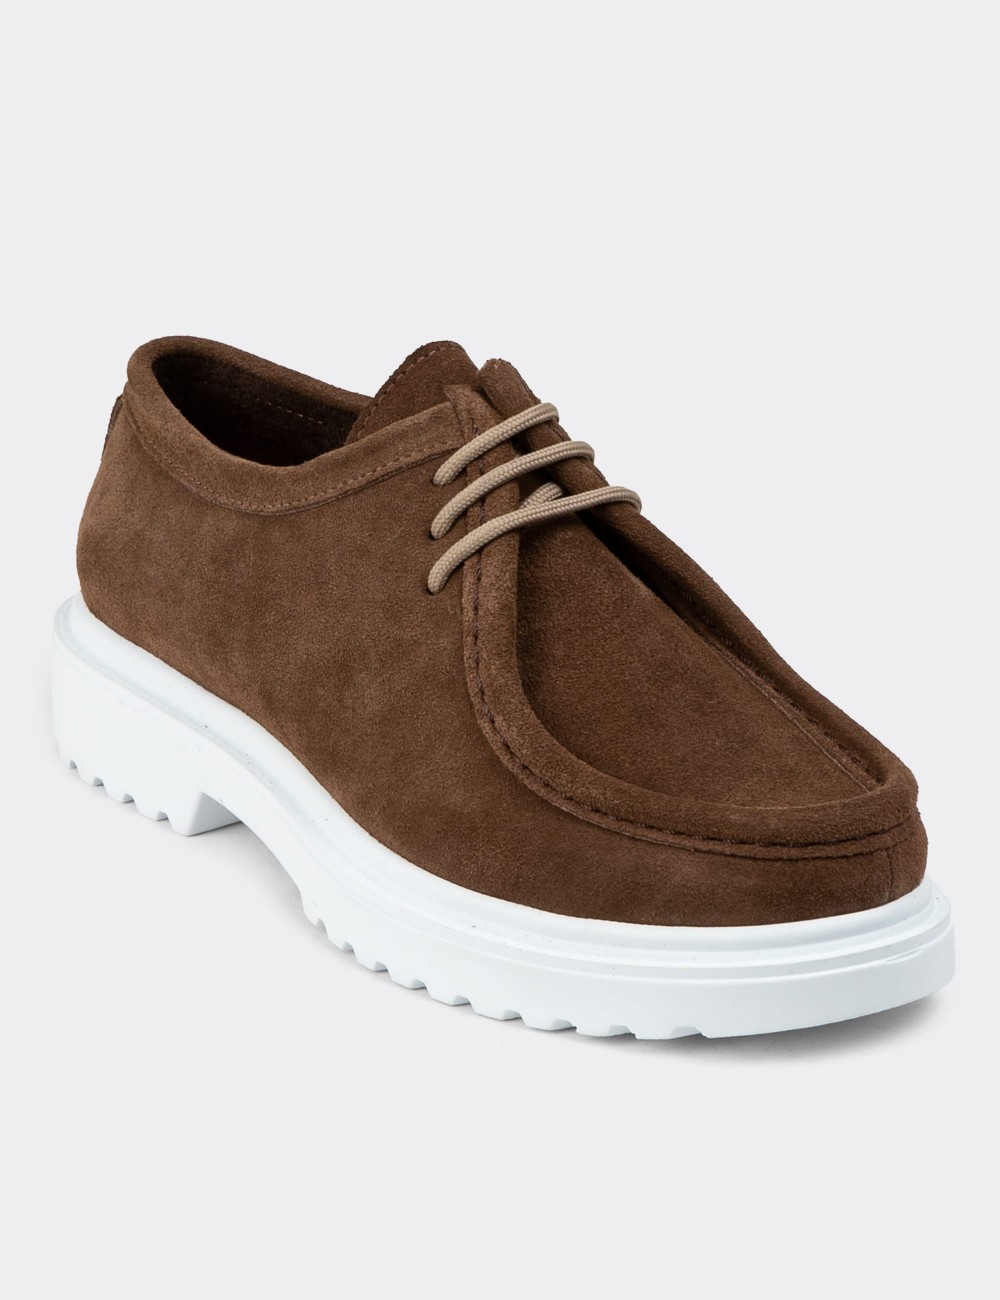 Sandstone Suede Leather Lace-up Shoes - 01935ZVZNC04